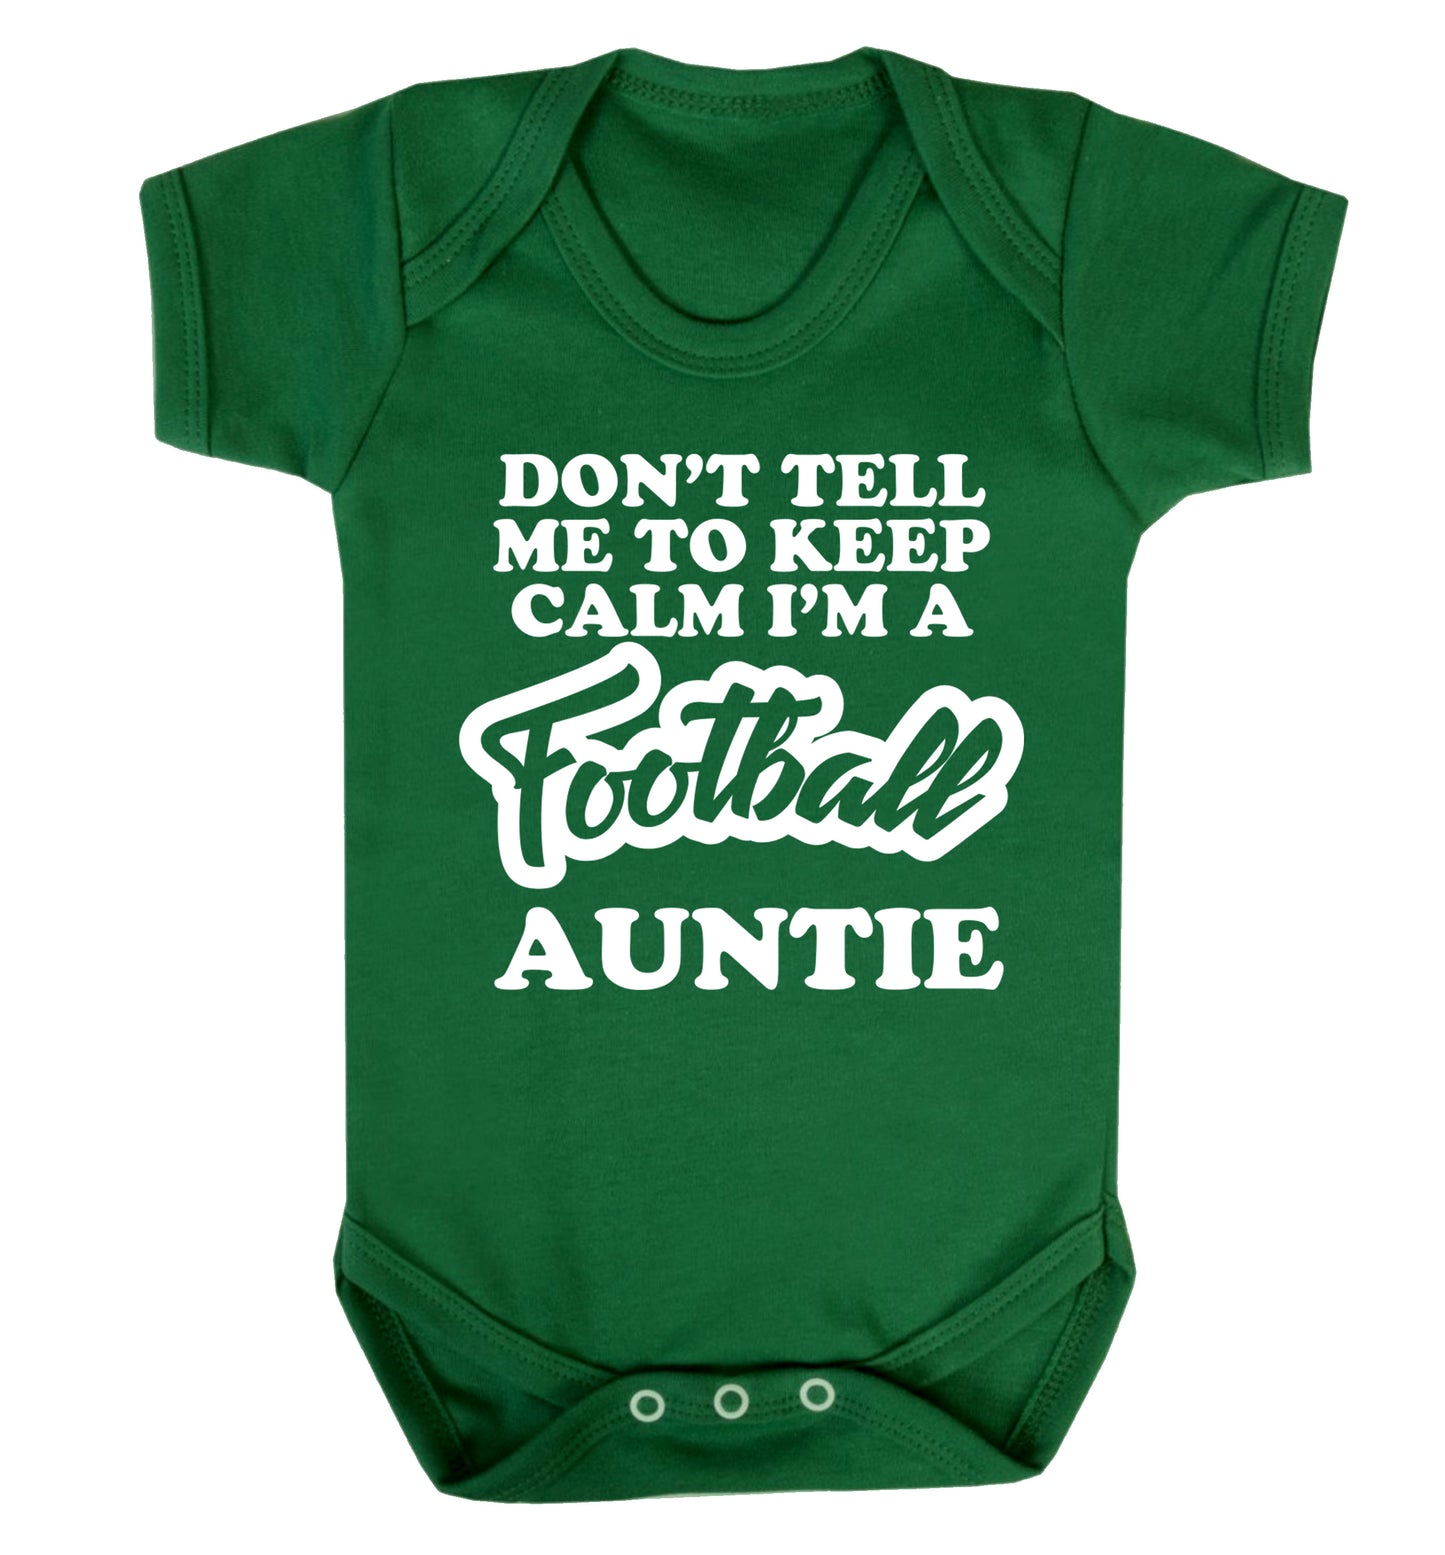 Don't tell me to keep calm I'm a football auntie Baby Vest green 18-24 months